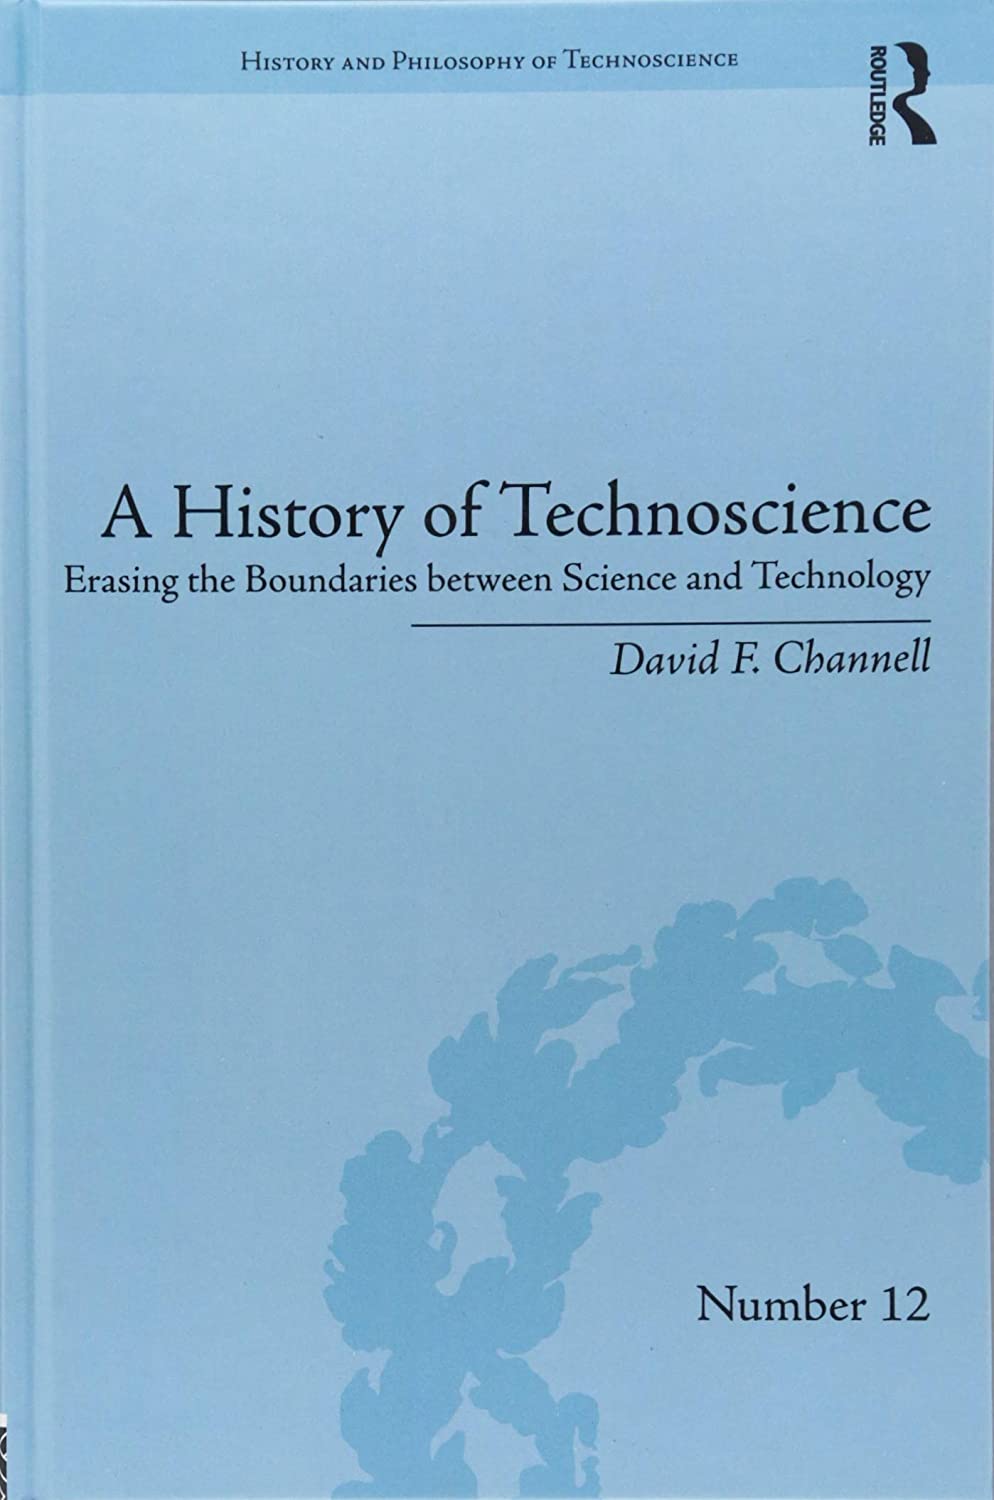 A History of Technoscience: Erasing the Boundaries between Science and Technology (History and Philosophy of Technoscience)